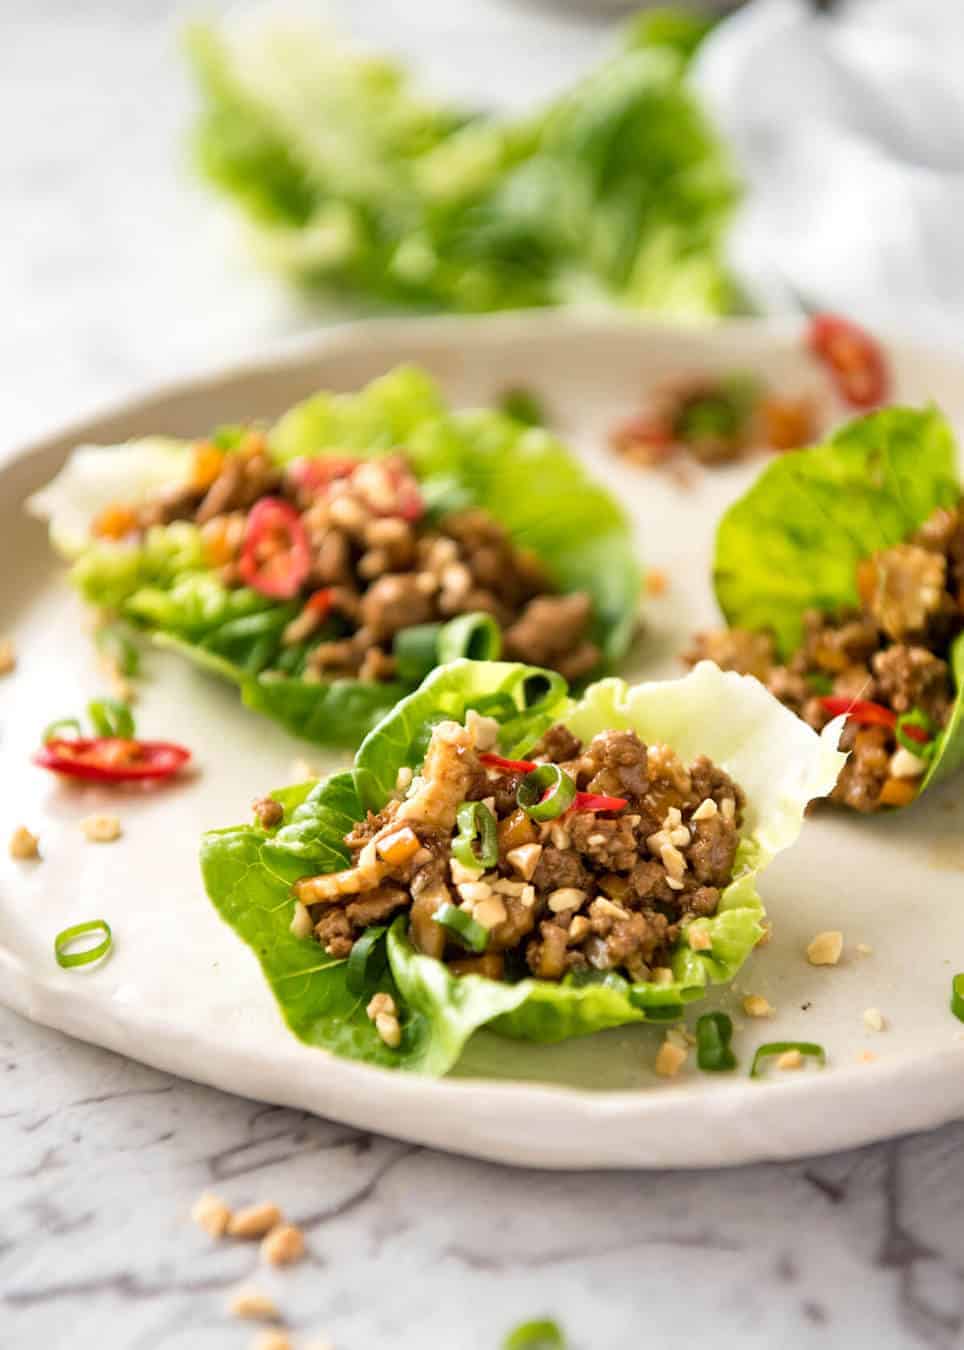 San Choy Bow (Chinese Lettuce Cups) - A great San Choy Bow starts with a great sauce. Get that right and you can make this with almost anything! recipetineats.com